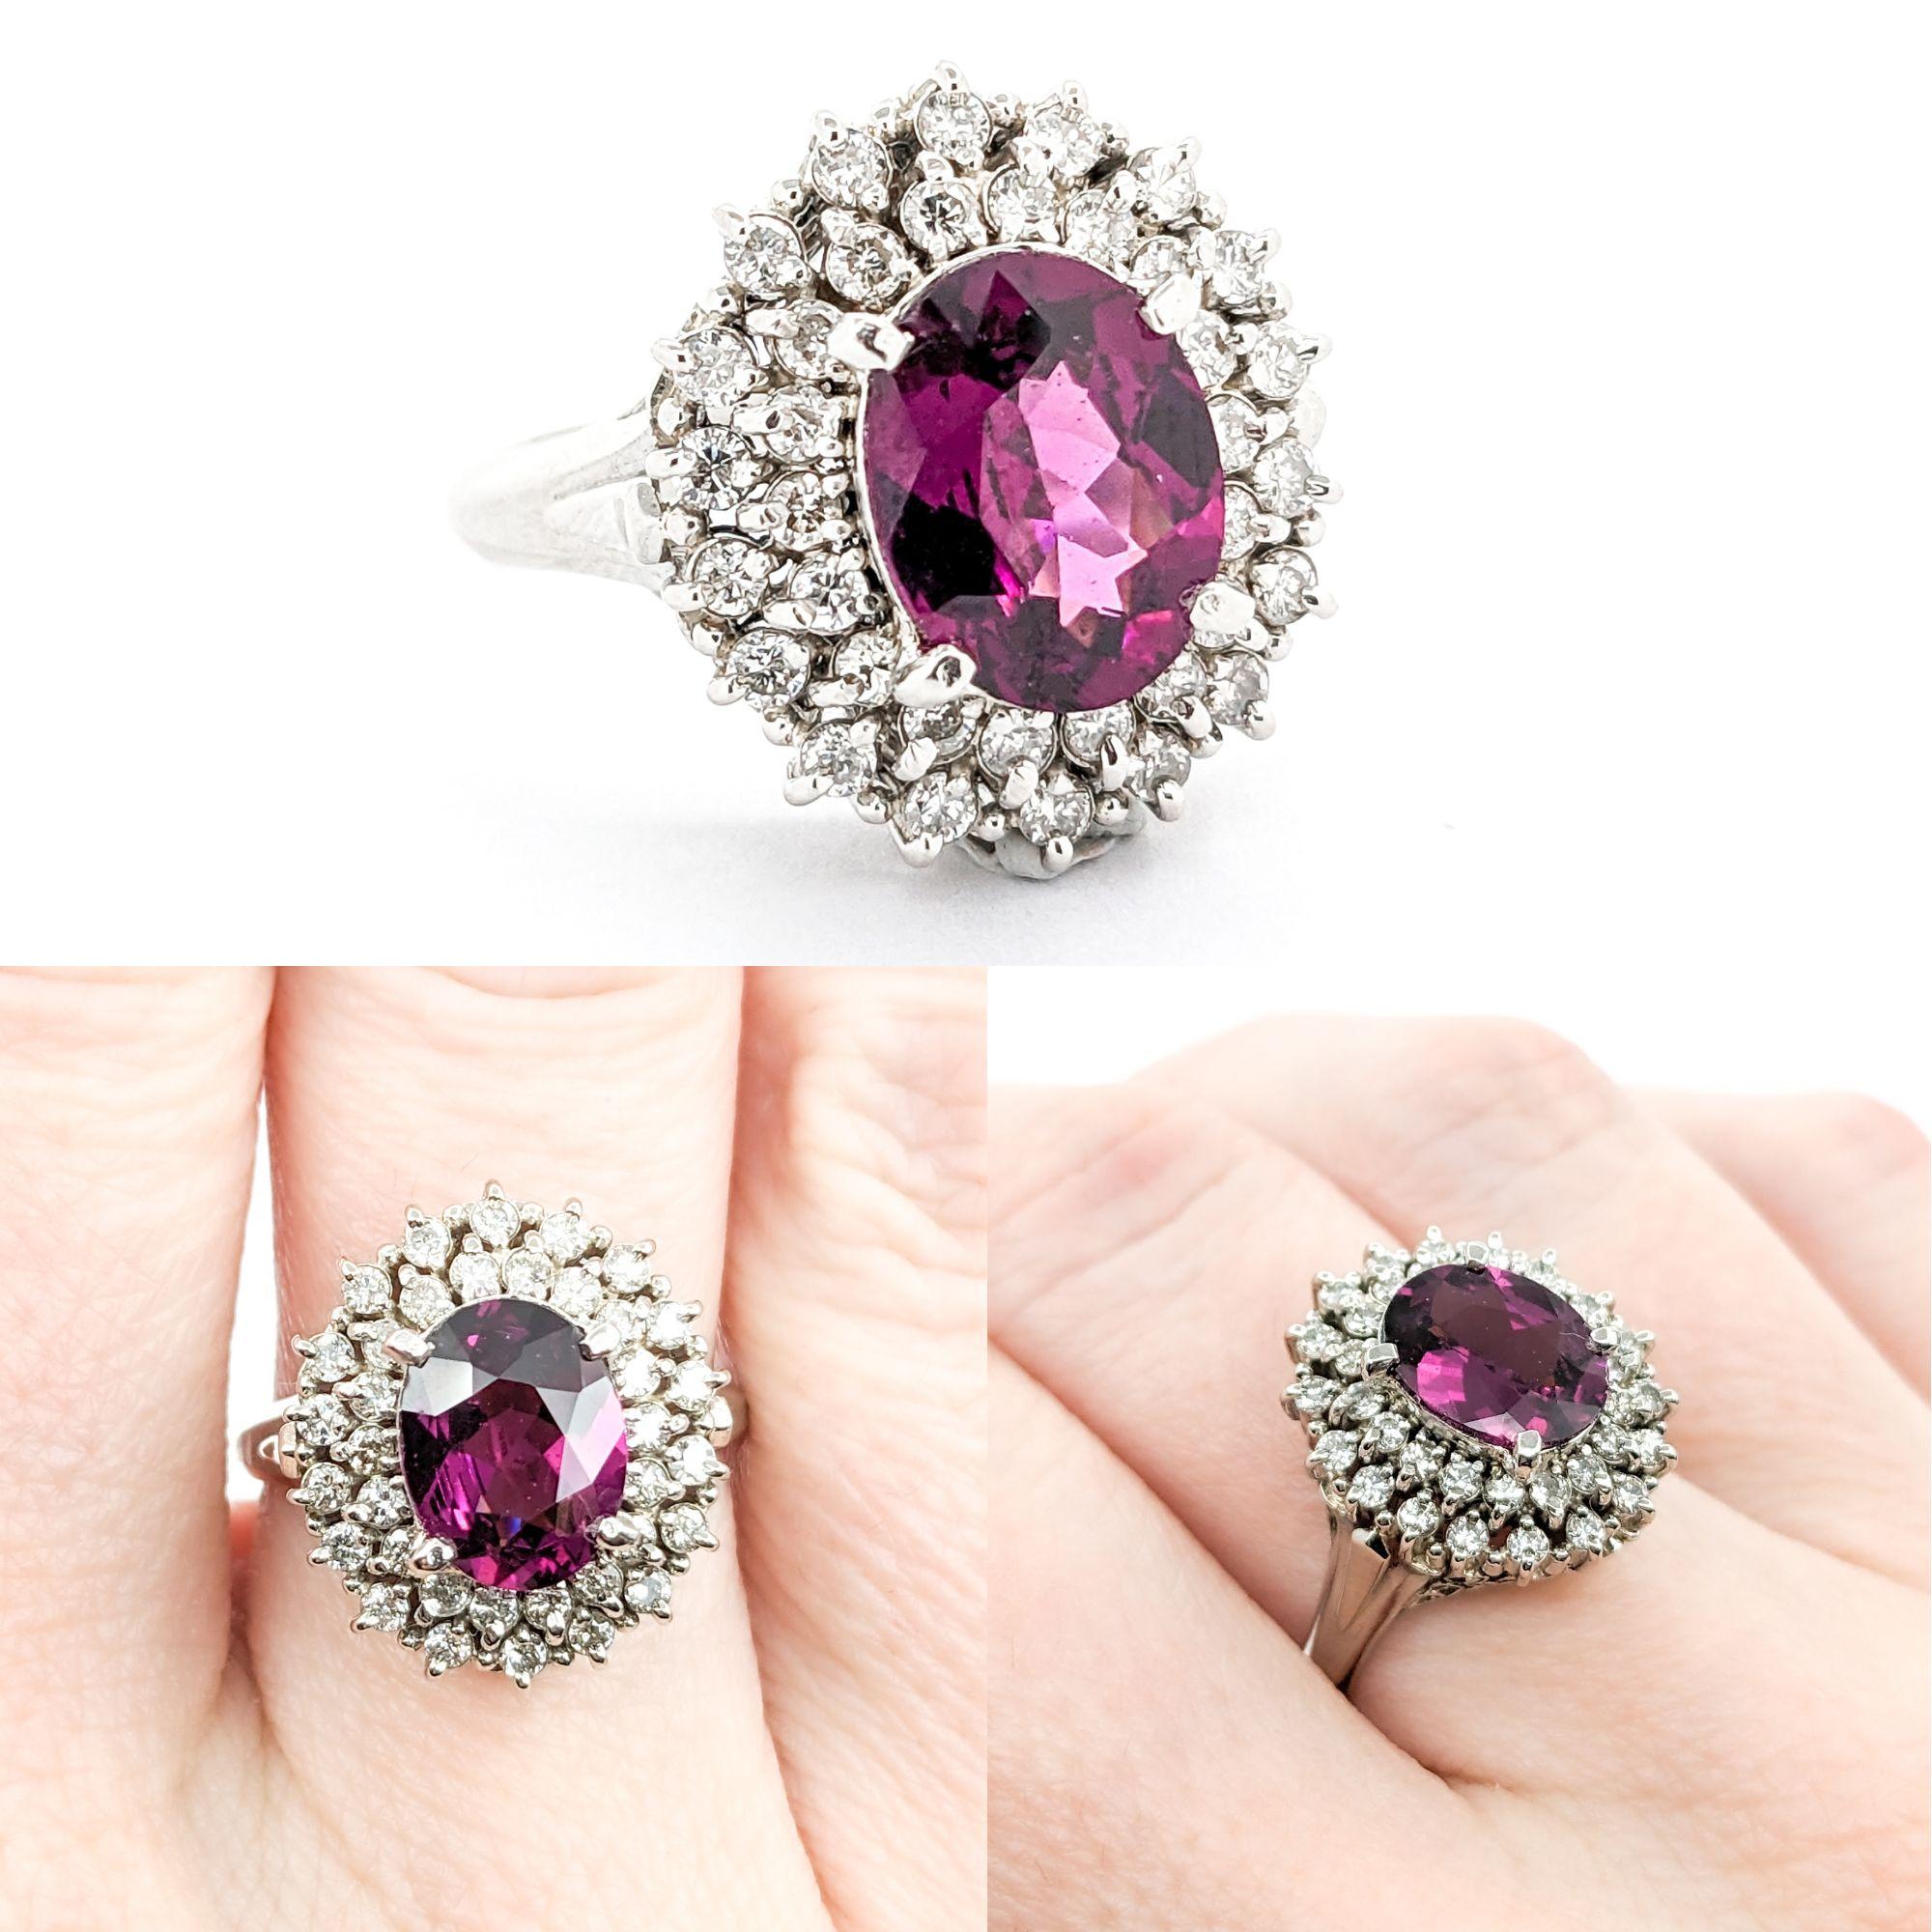 2.05ct Oval Purple Garnet & Diamond Ring in Platinum

Introducing this beautiful Purple Garnet Ring crafted in 900 Platinum. The ring features a 2.05ct Purple Garnet Centerpiece with 0.72ctw Round Diamonds in the form of a glittering double Halo.